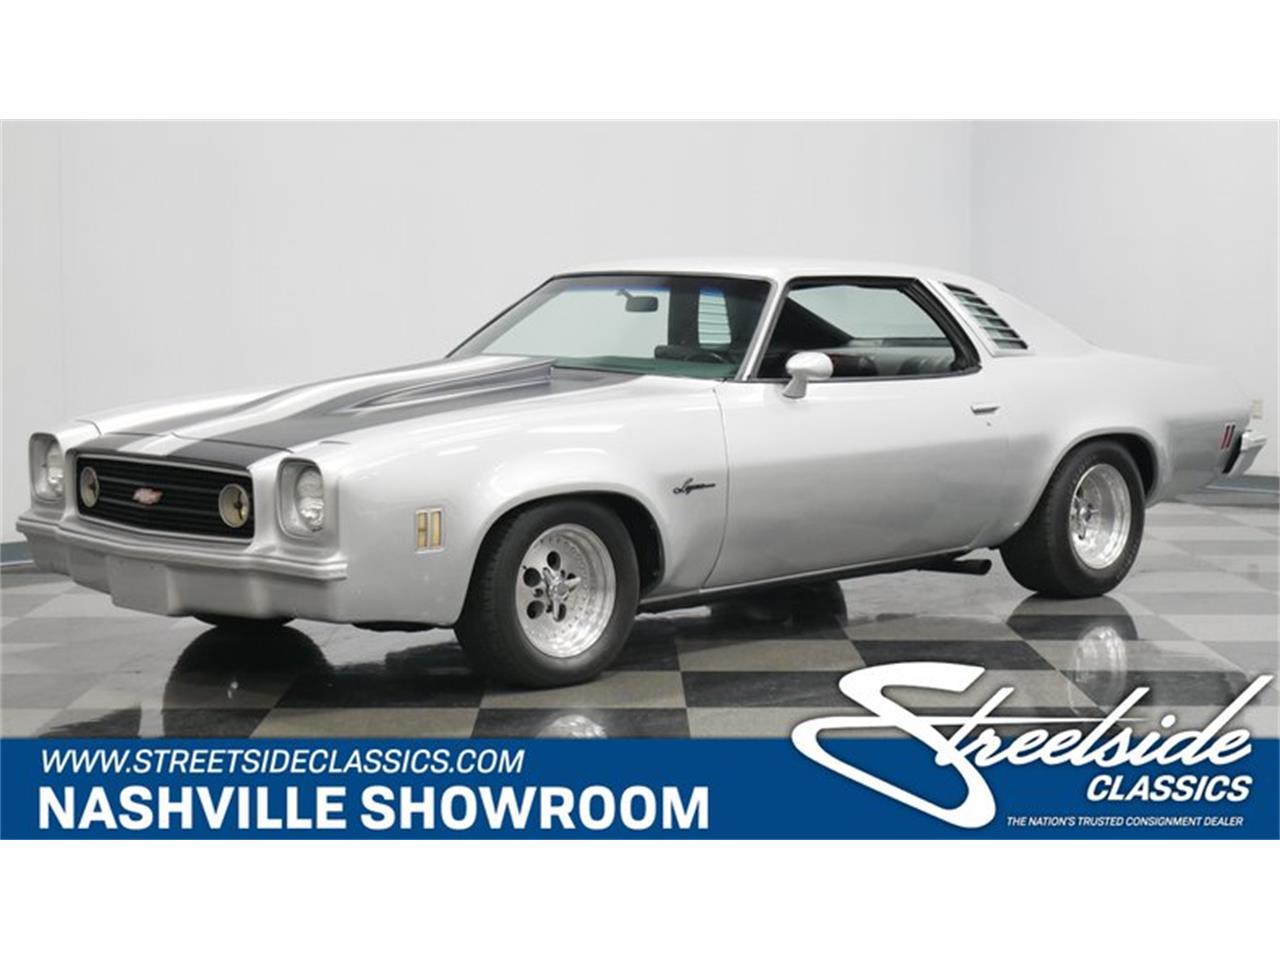 For Sale: 1973 Chevrolet Chevelle in Lavergne, Tennessee.